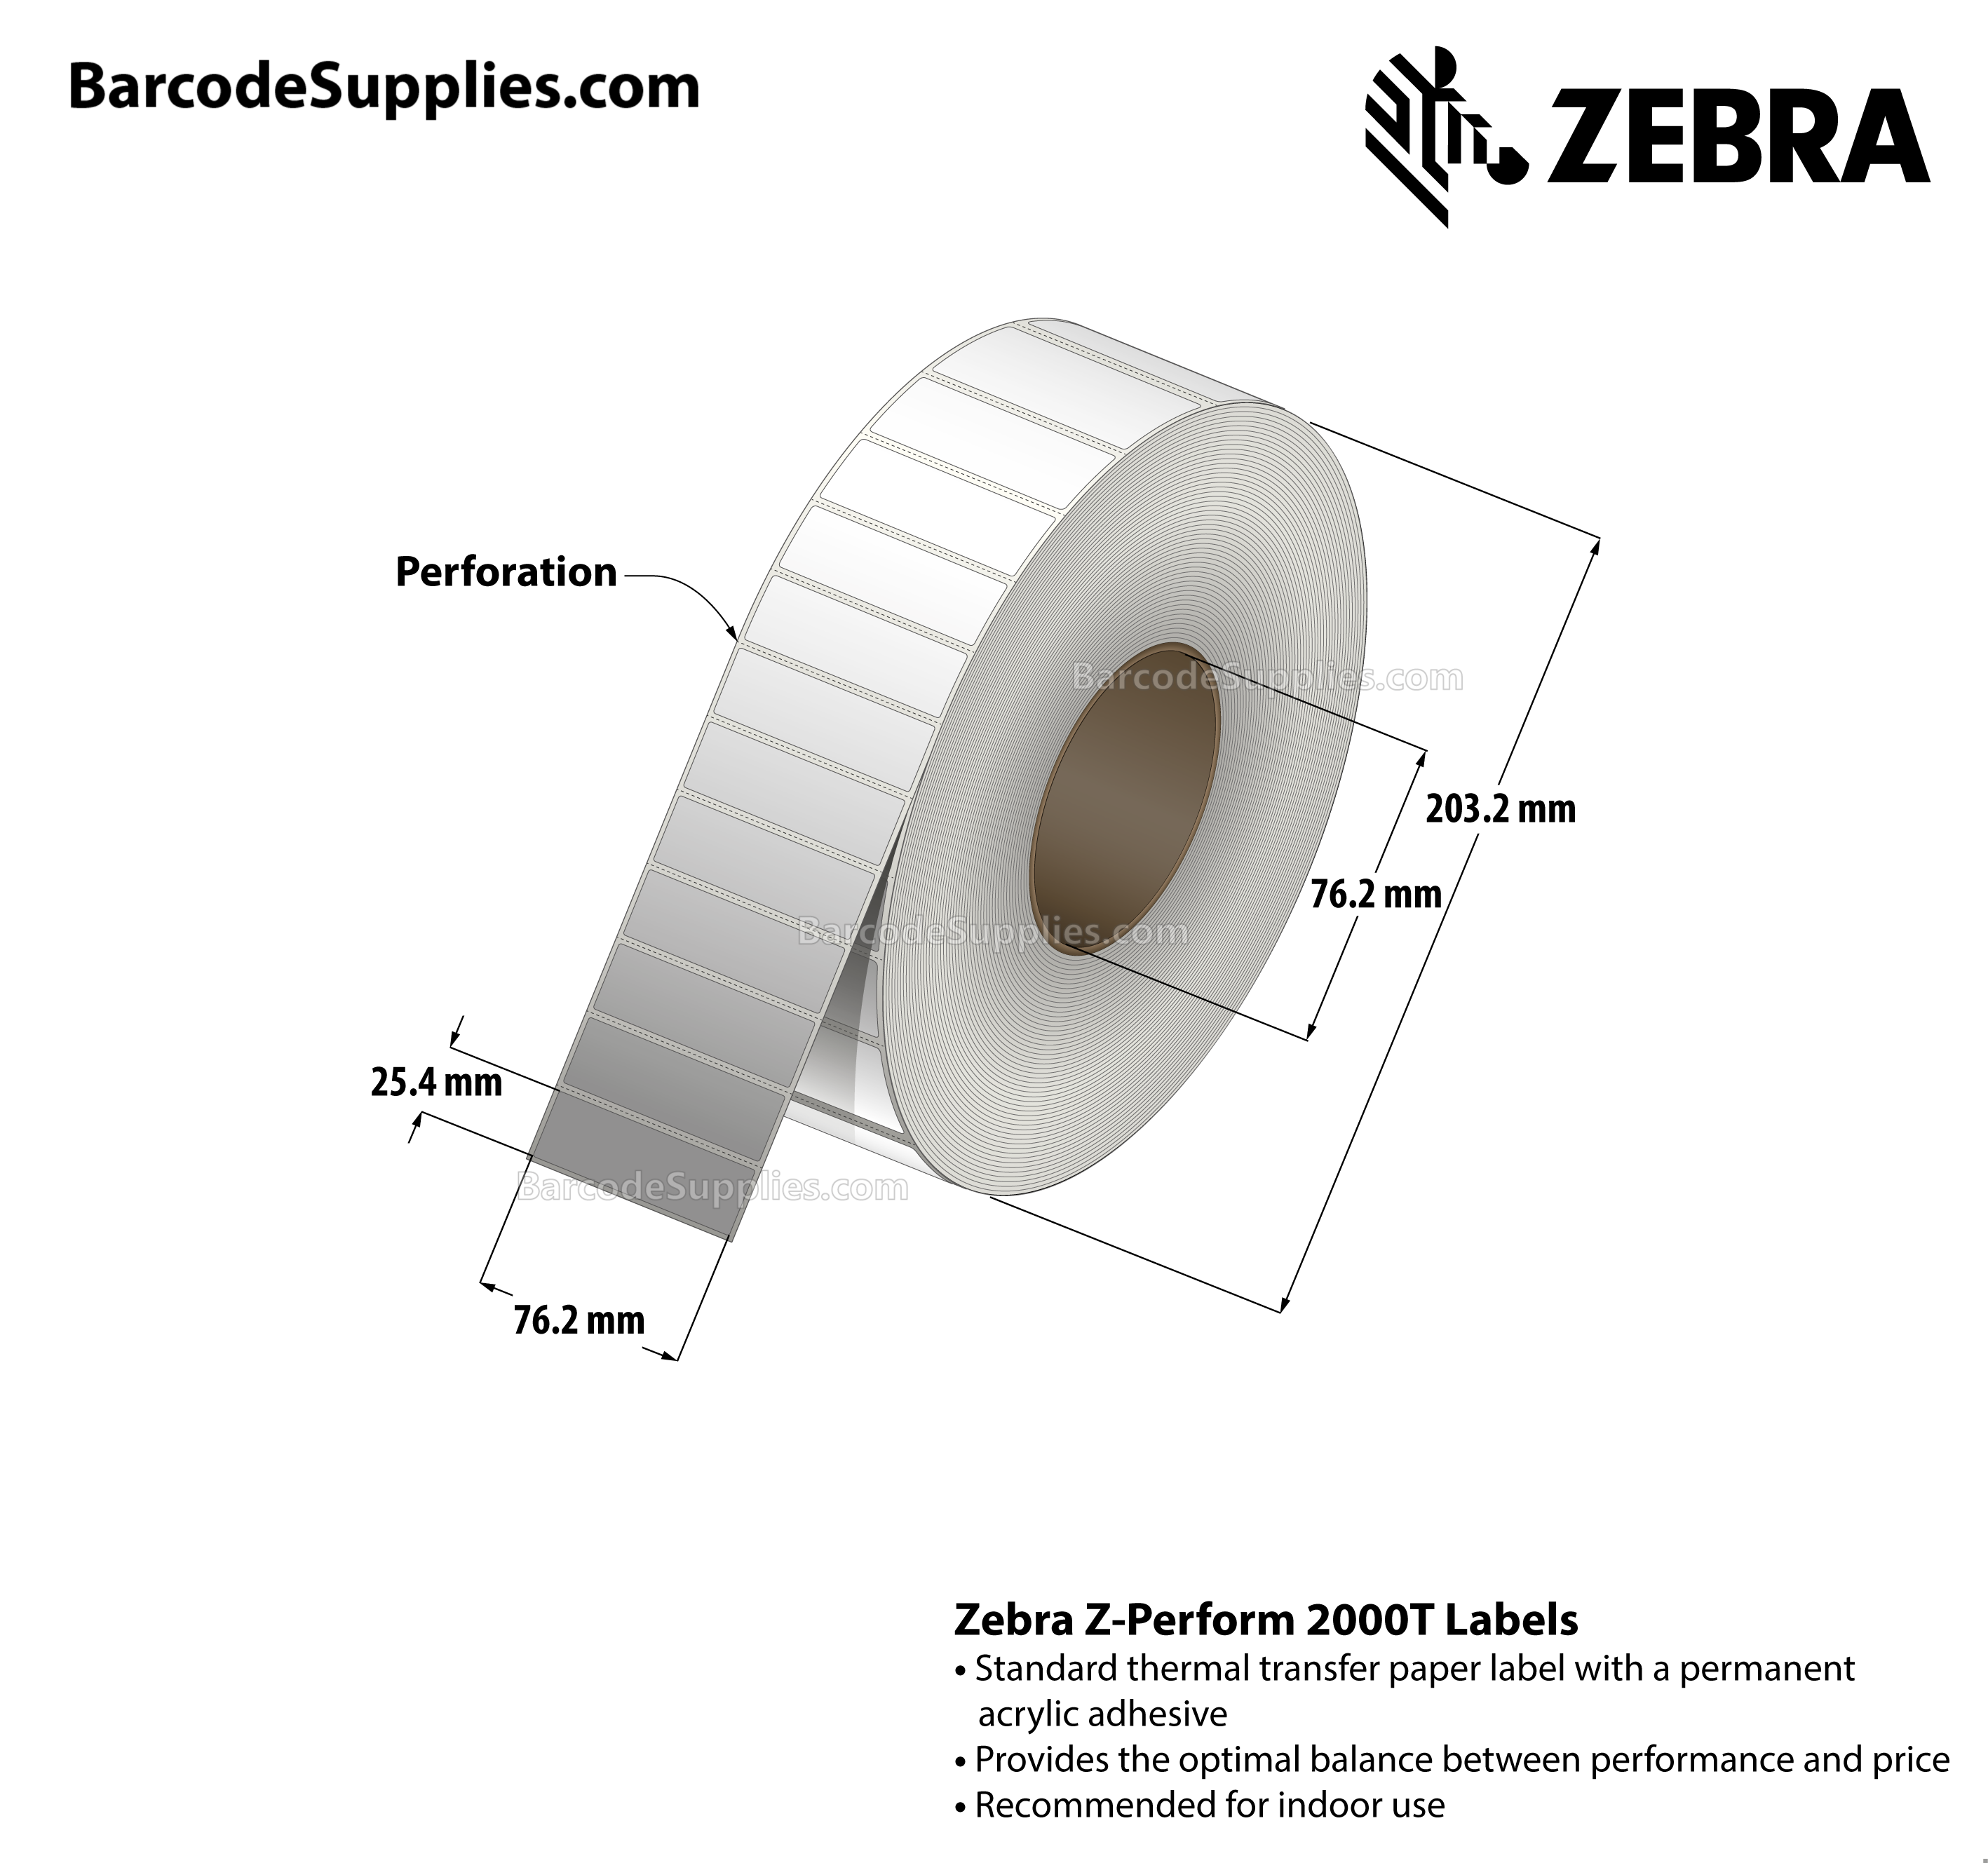 3 x 1 Thermal Transfer White Z-Perform 2000T Labels With Permanent Adhesive - Perforated - 5500 Labels Per Roll - Carton Of 6 Rolls - 33000 Labels Total - MPN: 10000287